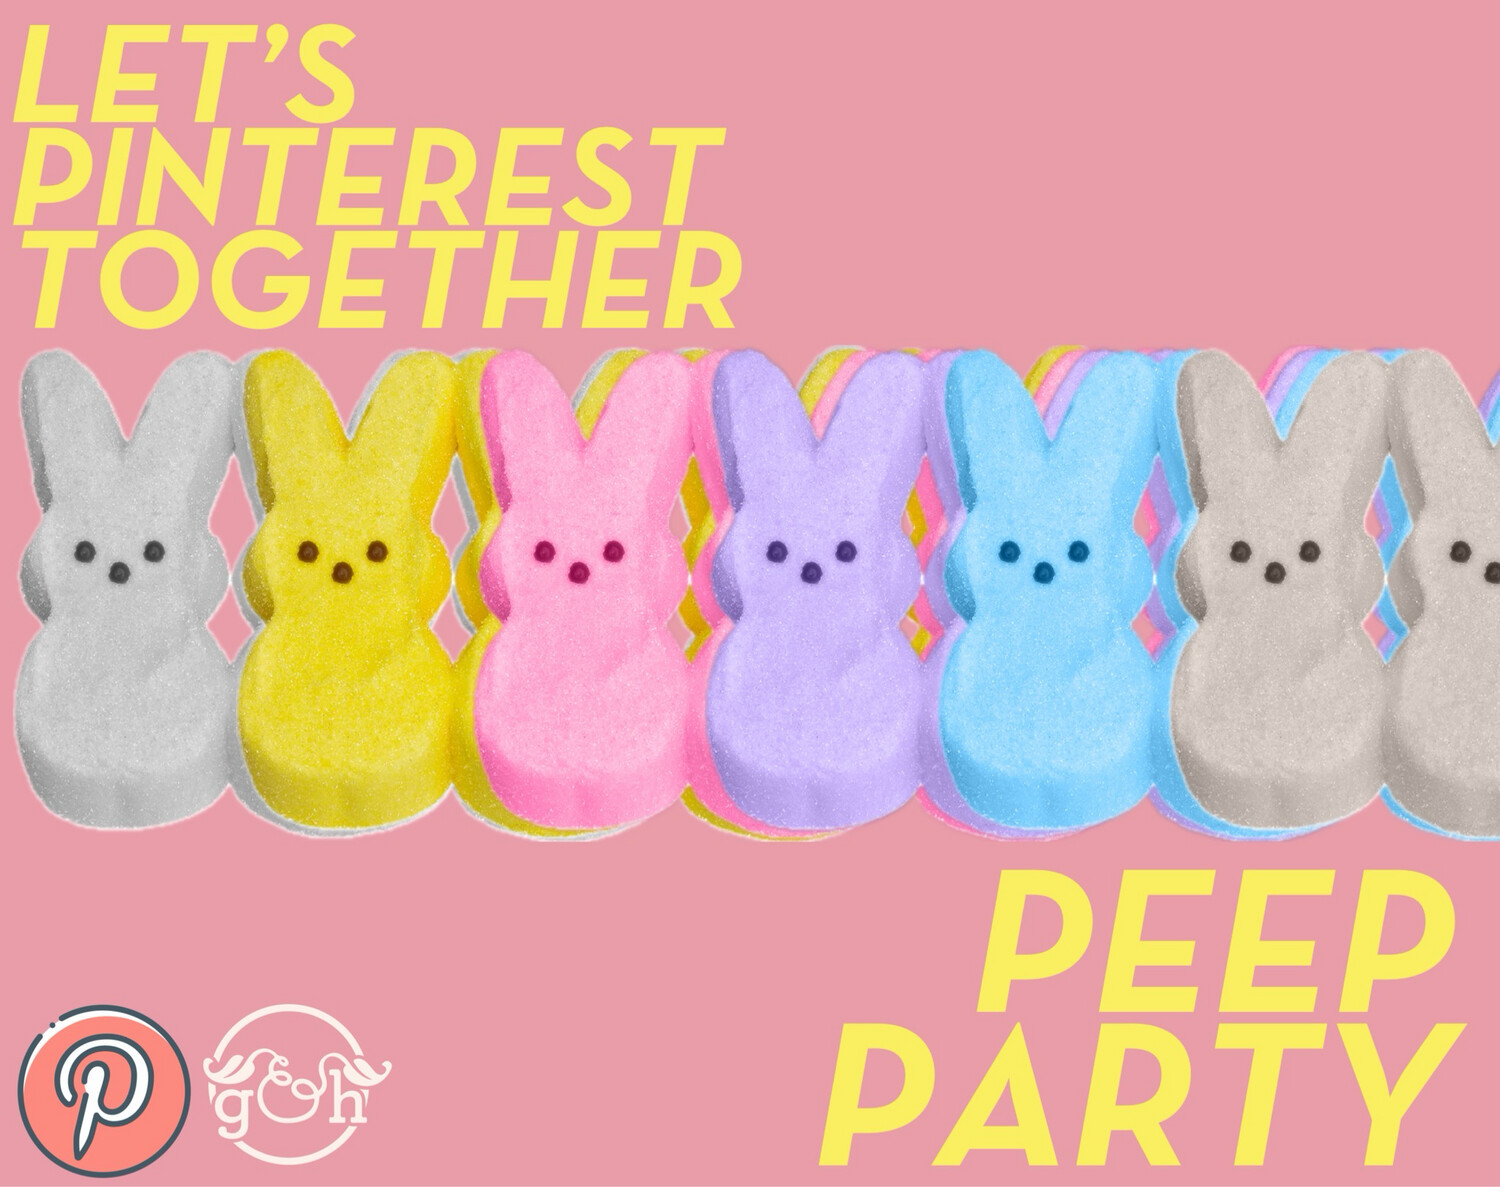 Let’s Pinterest Together: Peep Party